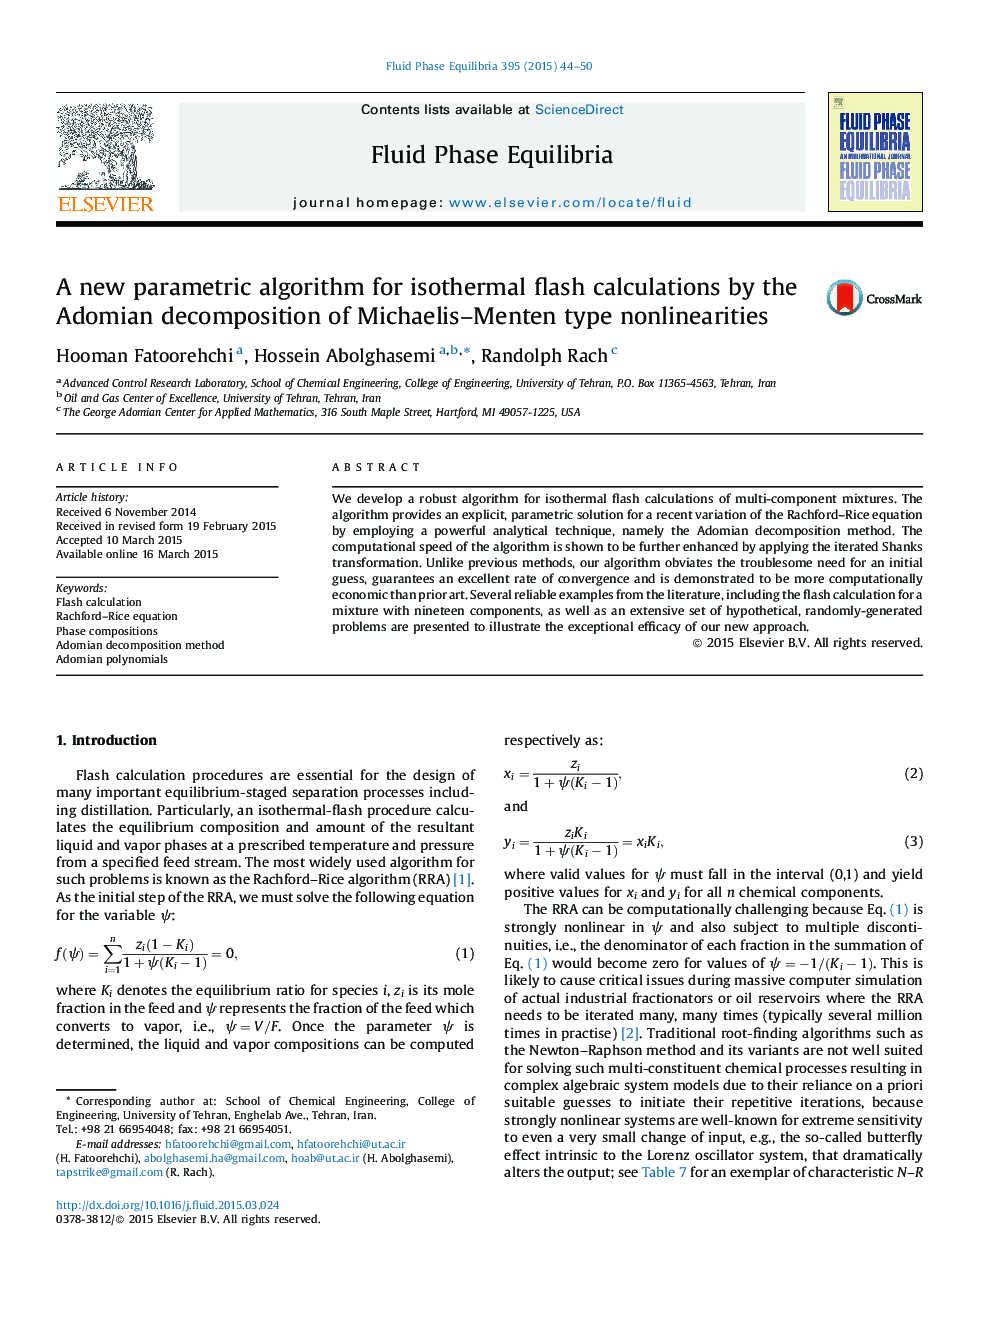 A new parametric algorithm for isothermal flash calculations by the Adomian decomposition of Michaelis–Menten type nonlinearities